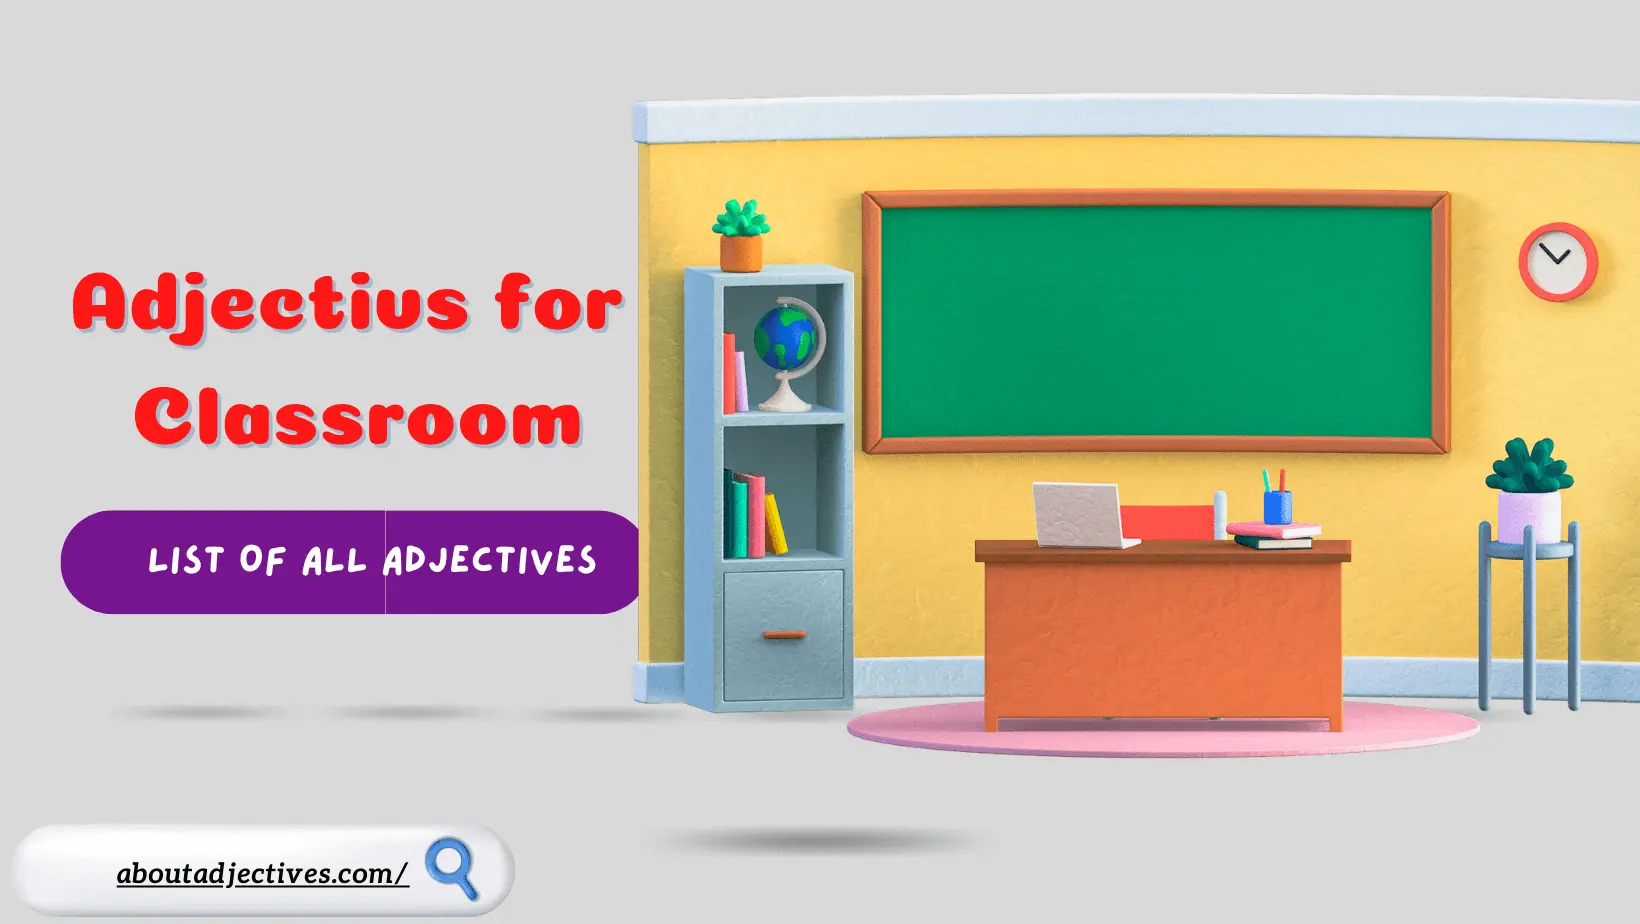 Adjectives for Classroom